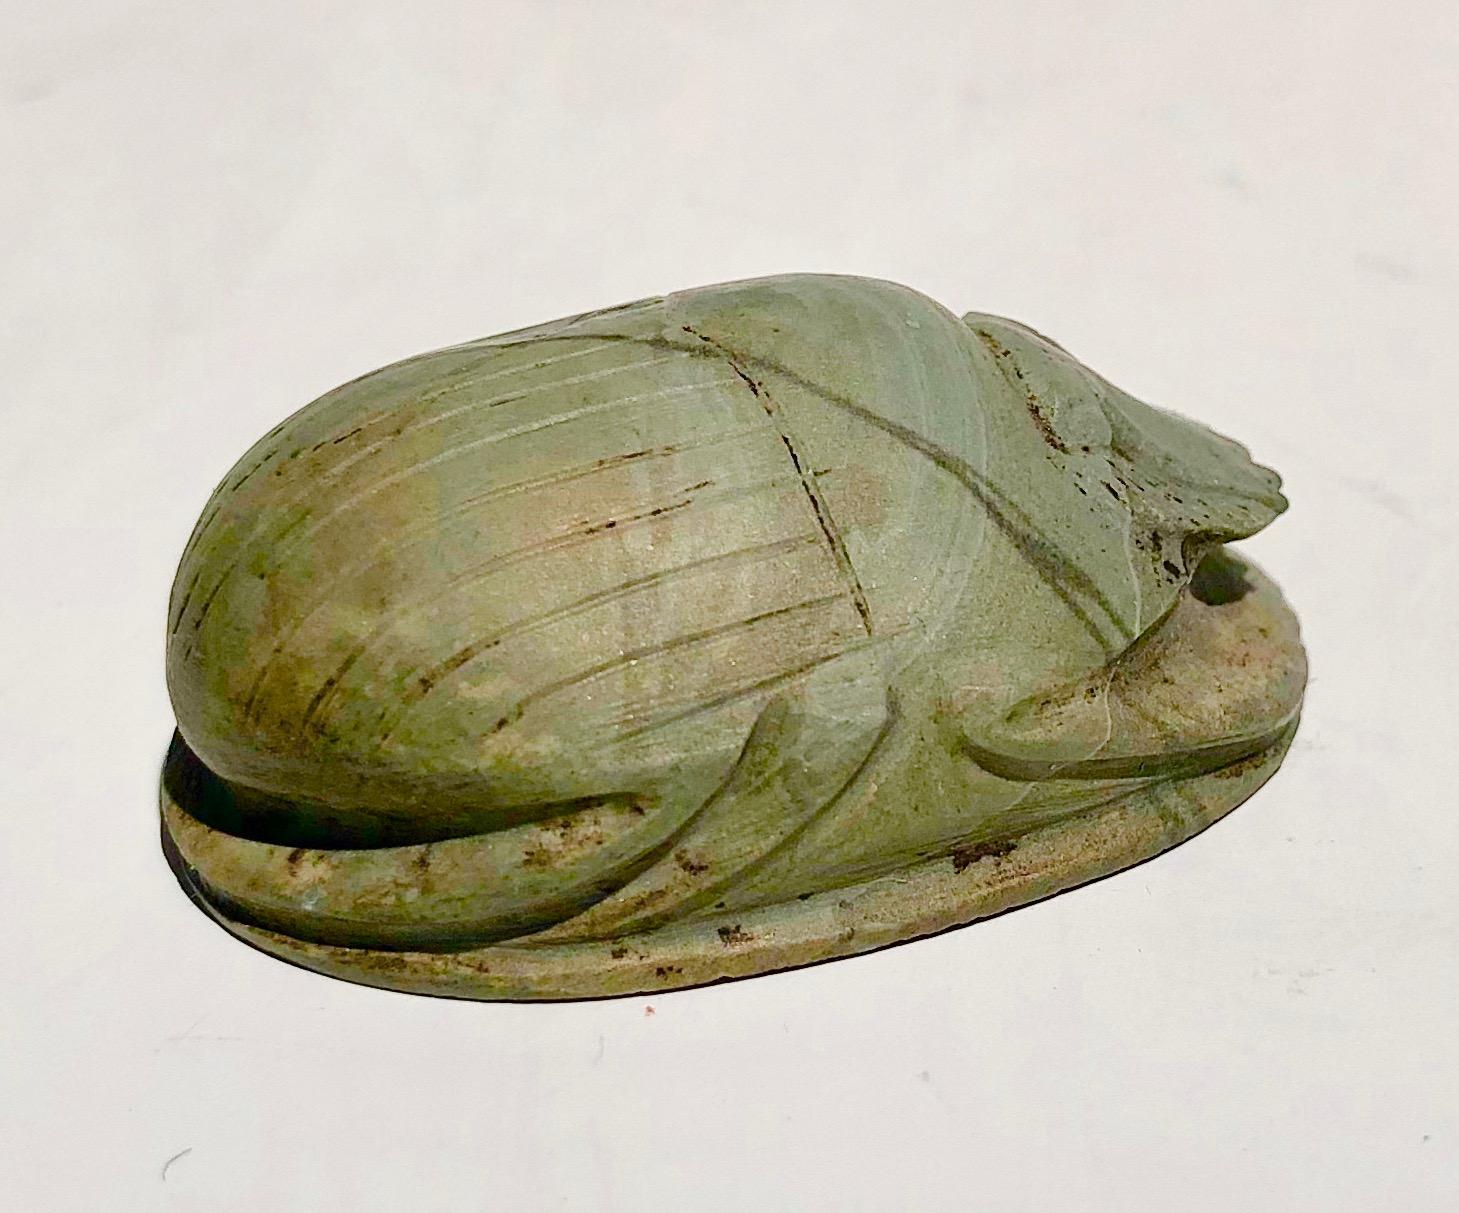 Delicately carved heart scarab. Greenish stone with fine veins. Egypt, late period, 664-332 BC. Provenance: German collection of Mr. E. S., Nr. 741; previously collection of Prof. Dr. C. Haebrlin, Wyk/Föhr. Imported by missionaries in the 19th